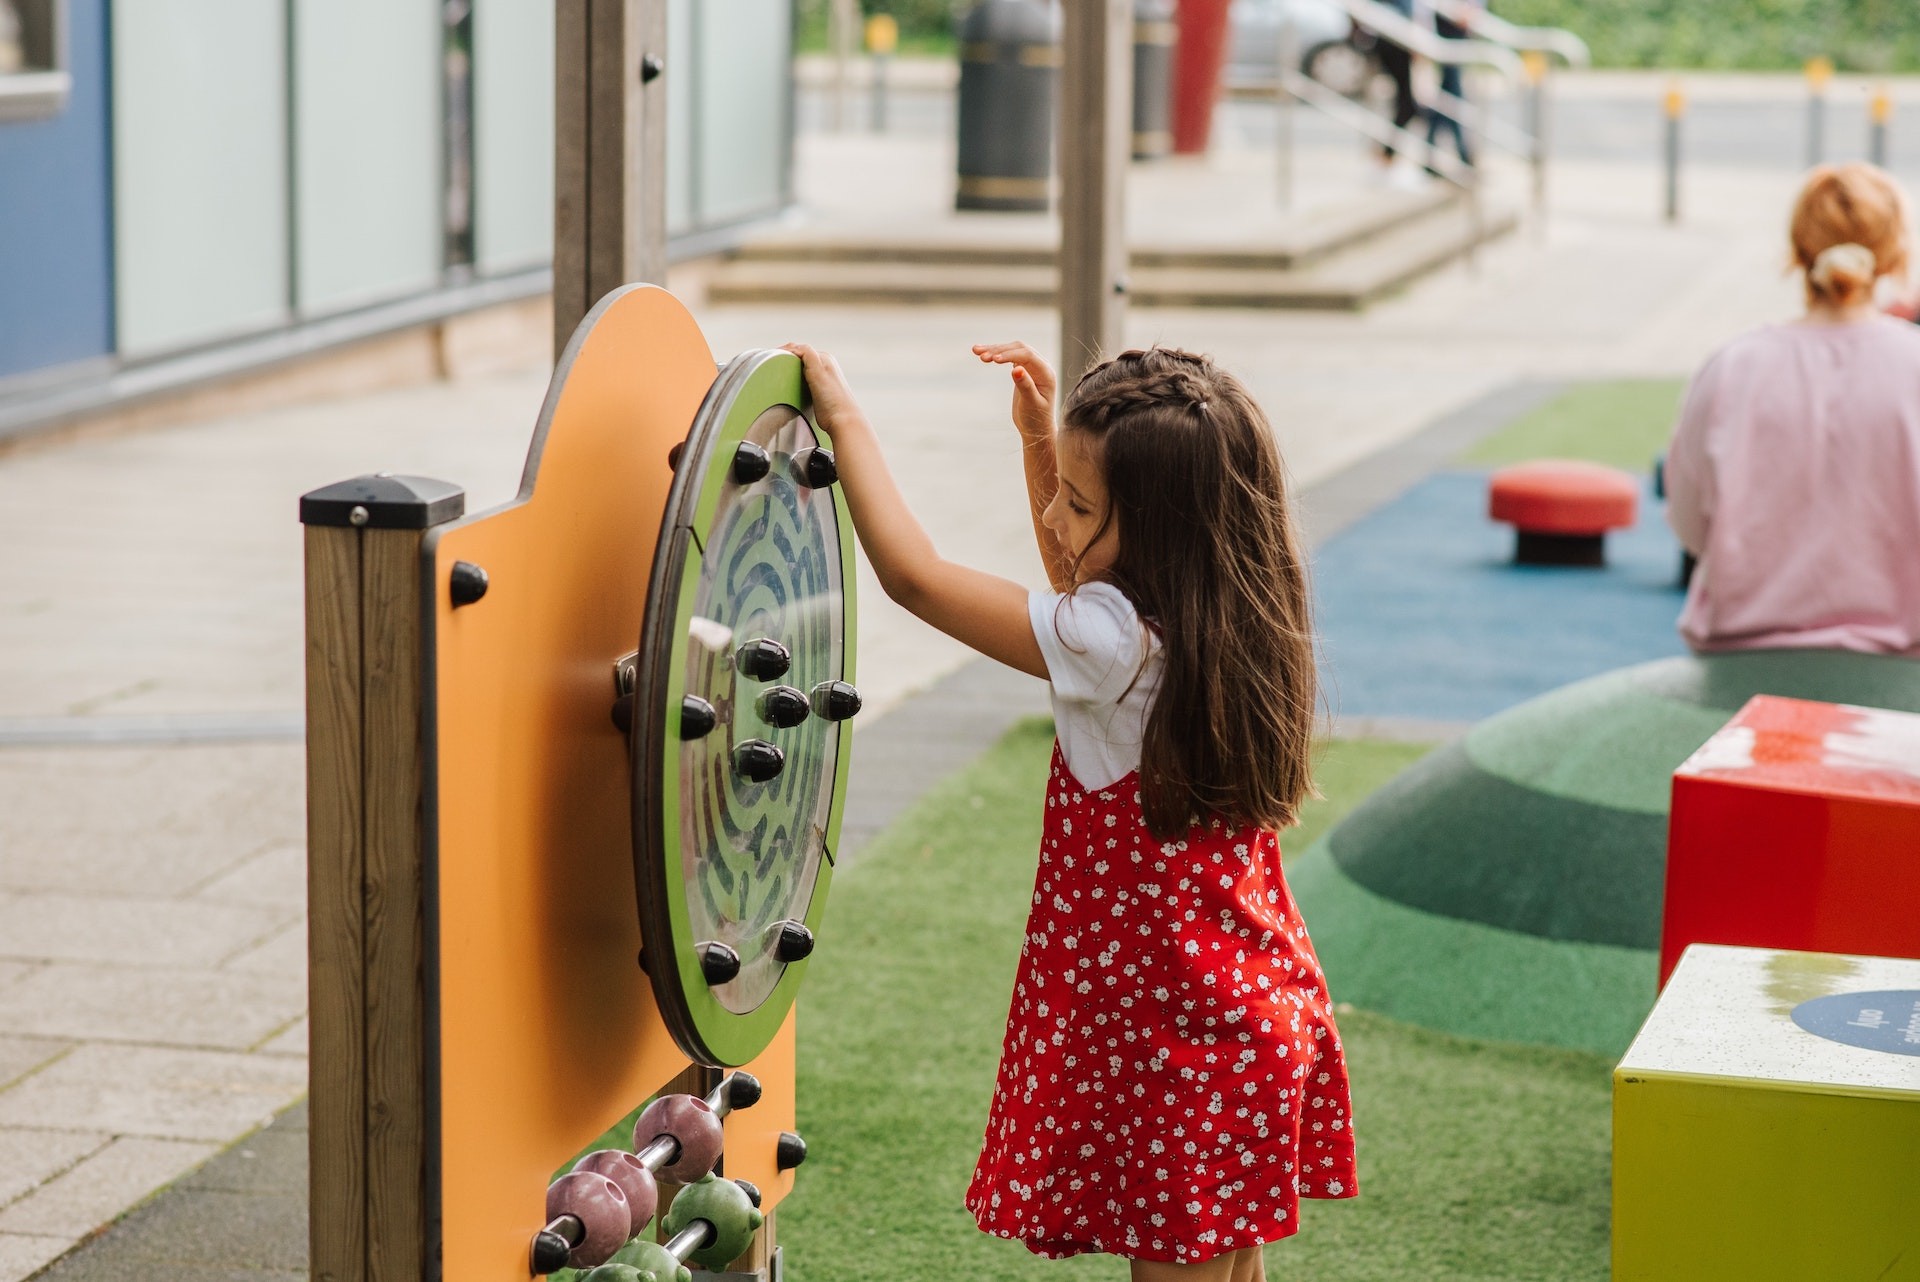 Child in red dress spinning a play wheel on playground